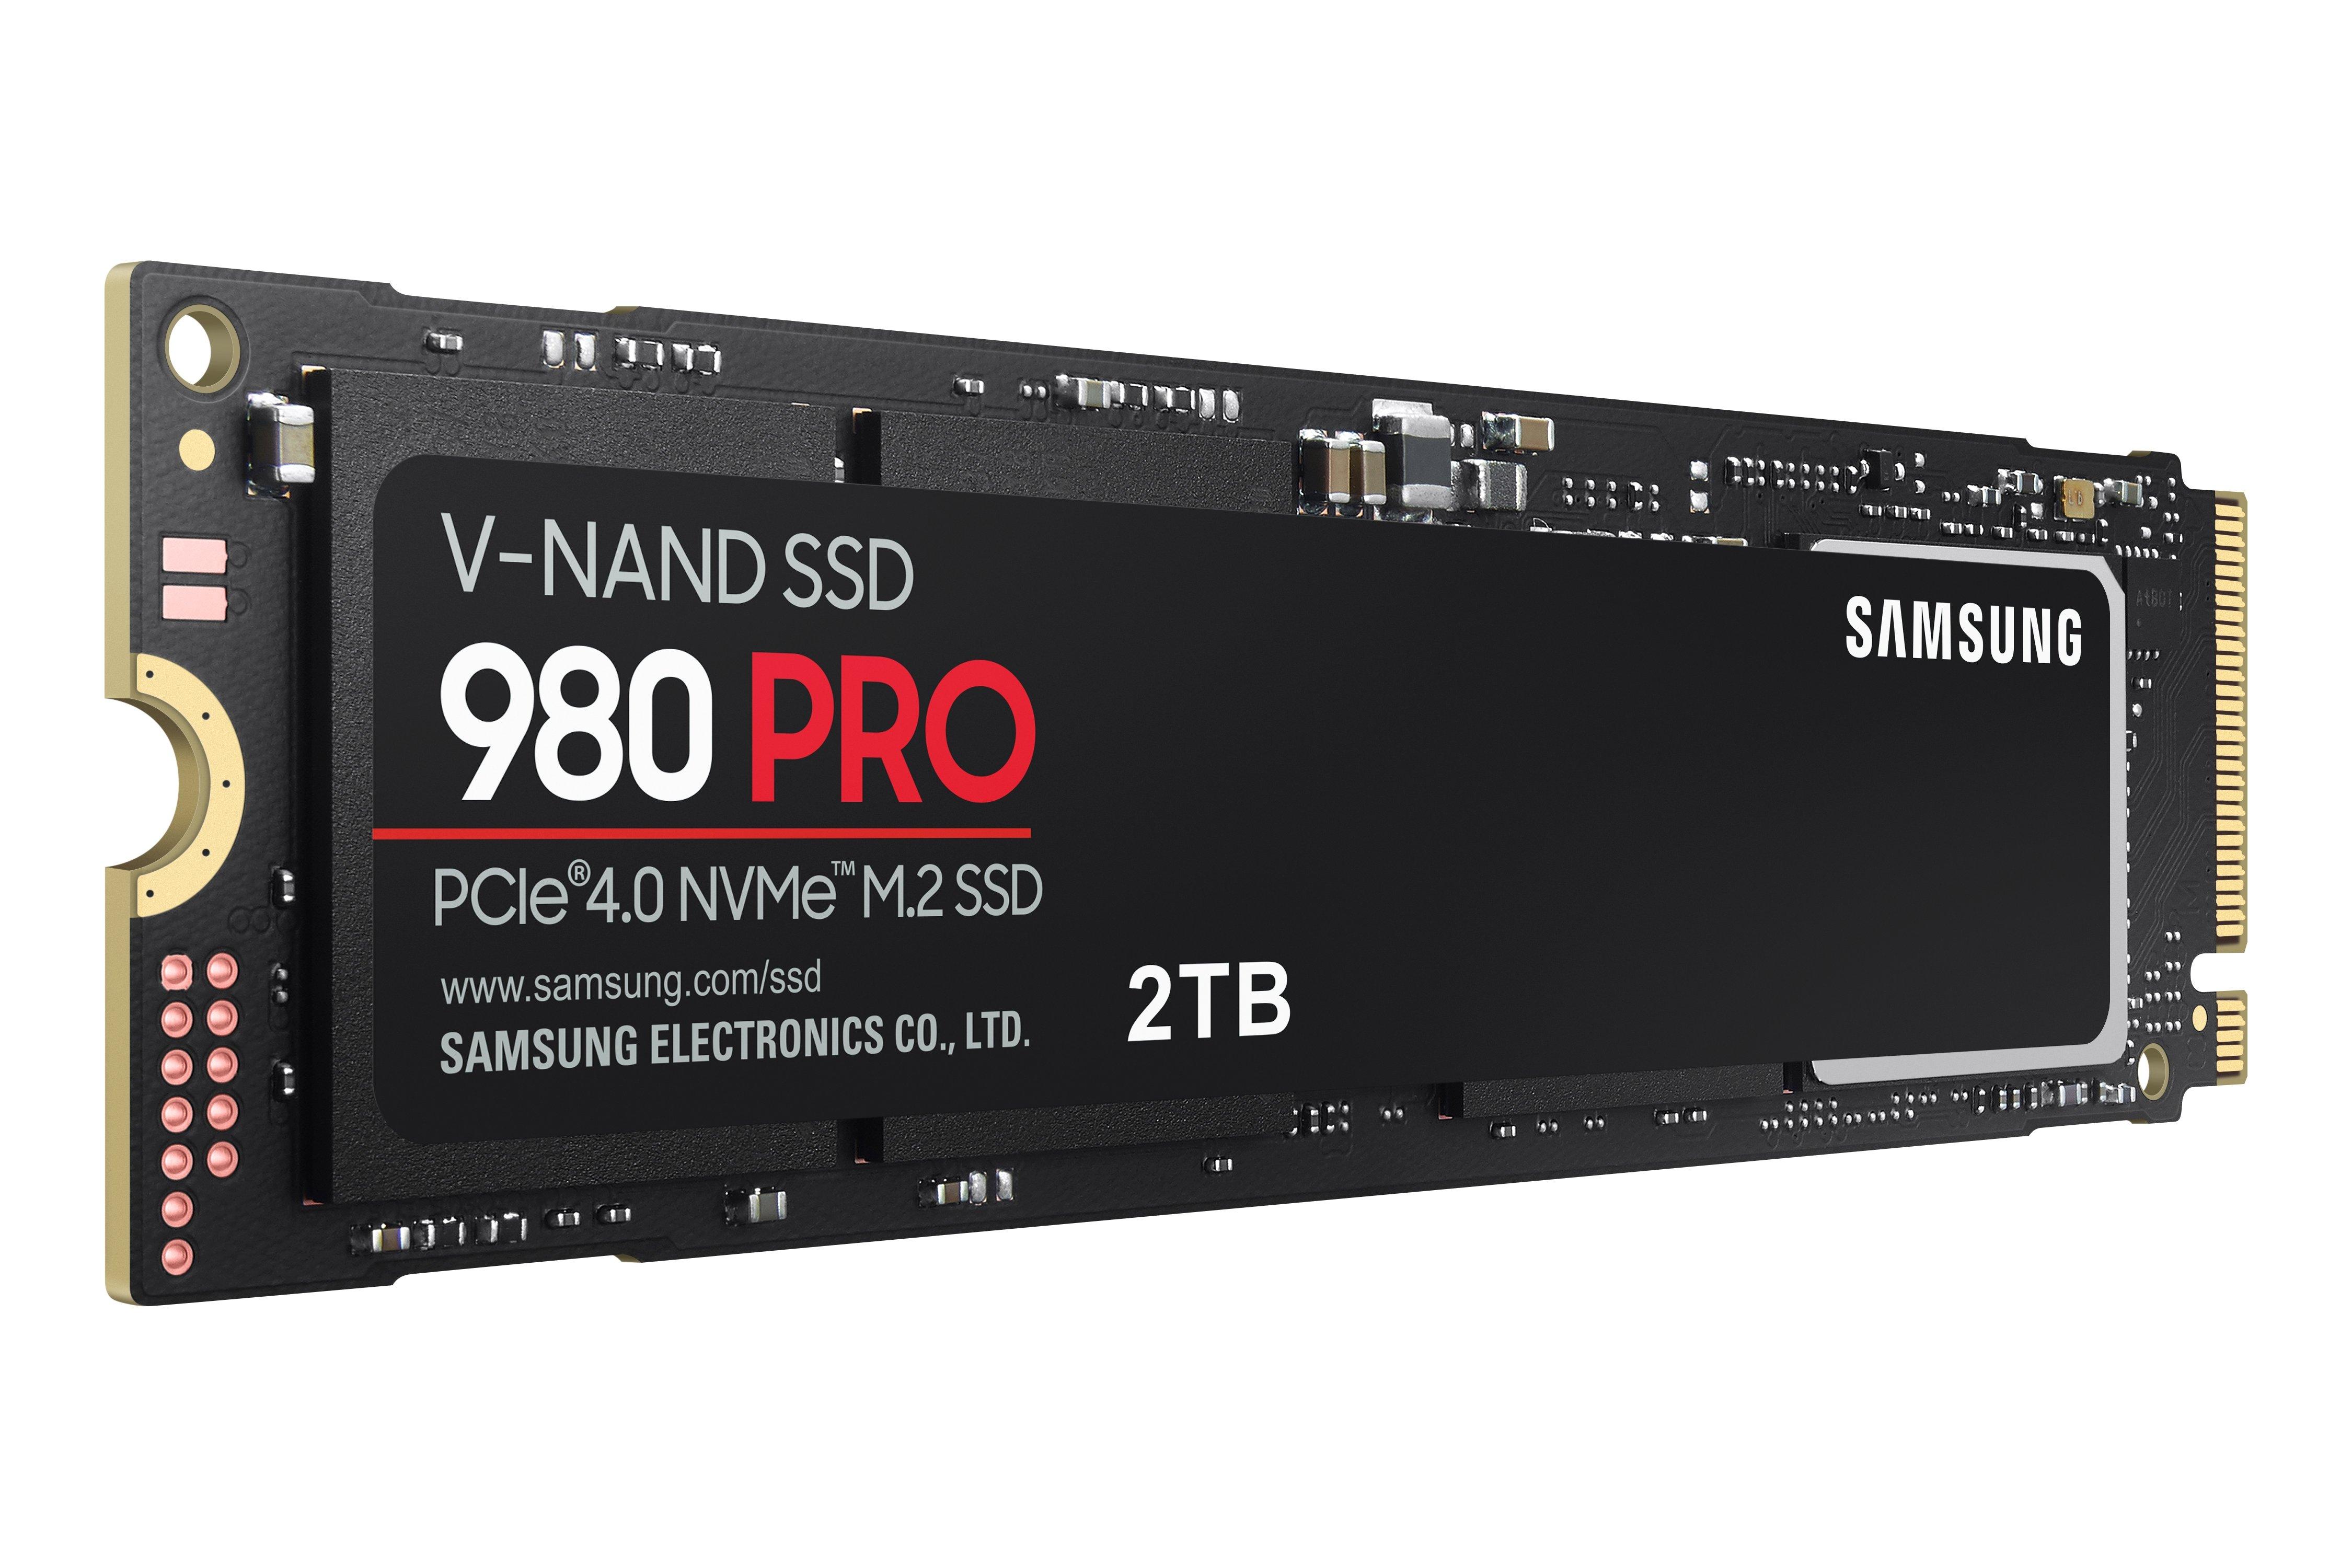 Samsung is releasing a 980 Pro PS5 SSD with a heatsink later this month